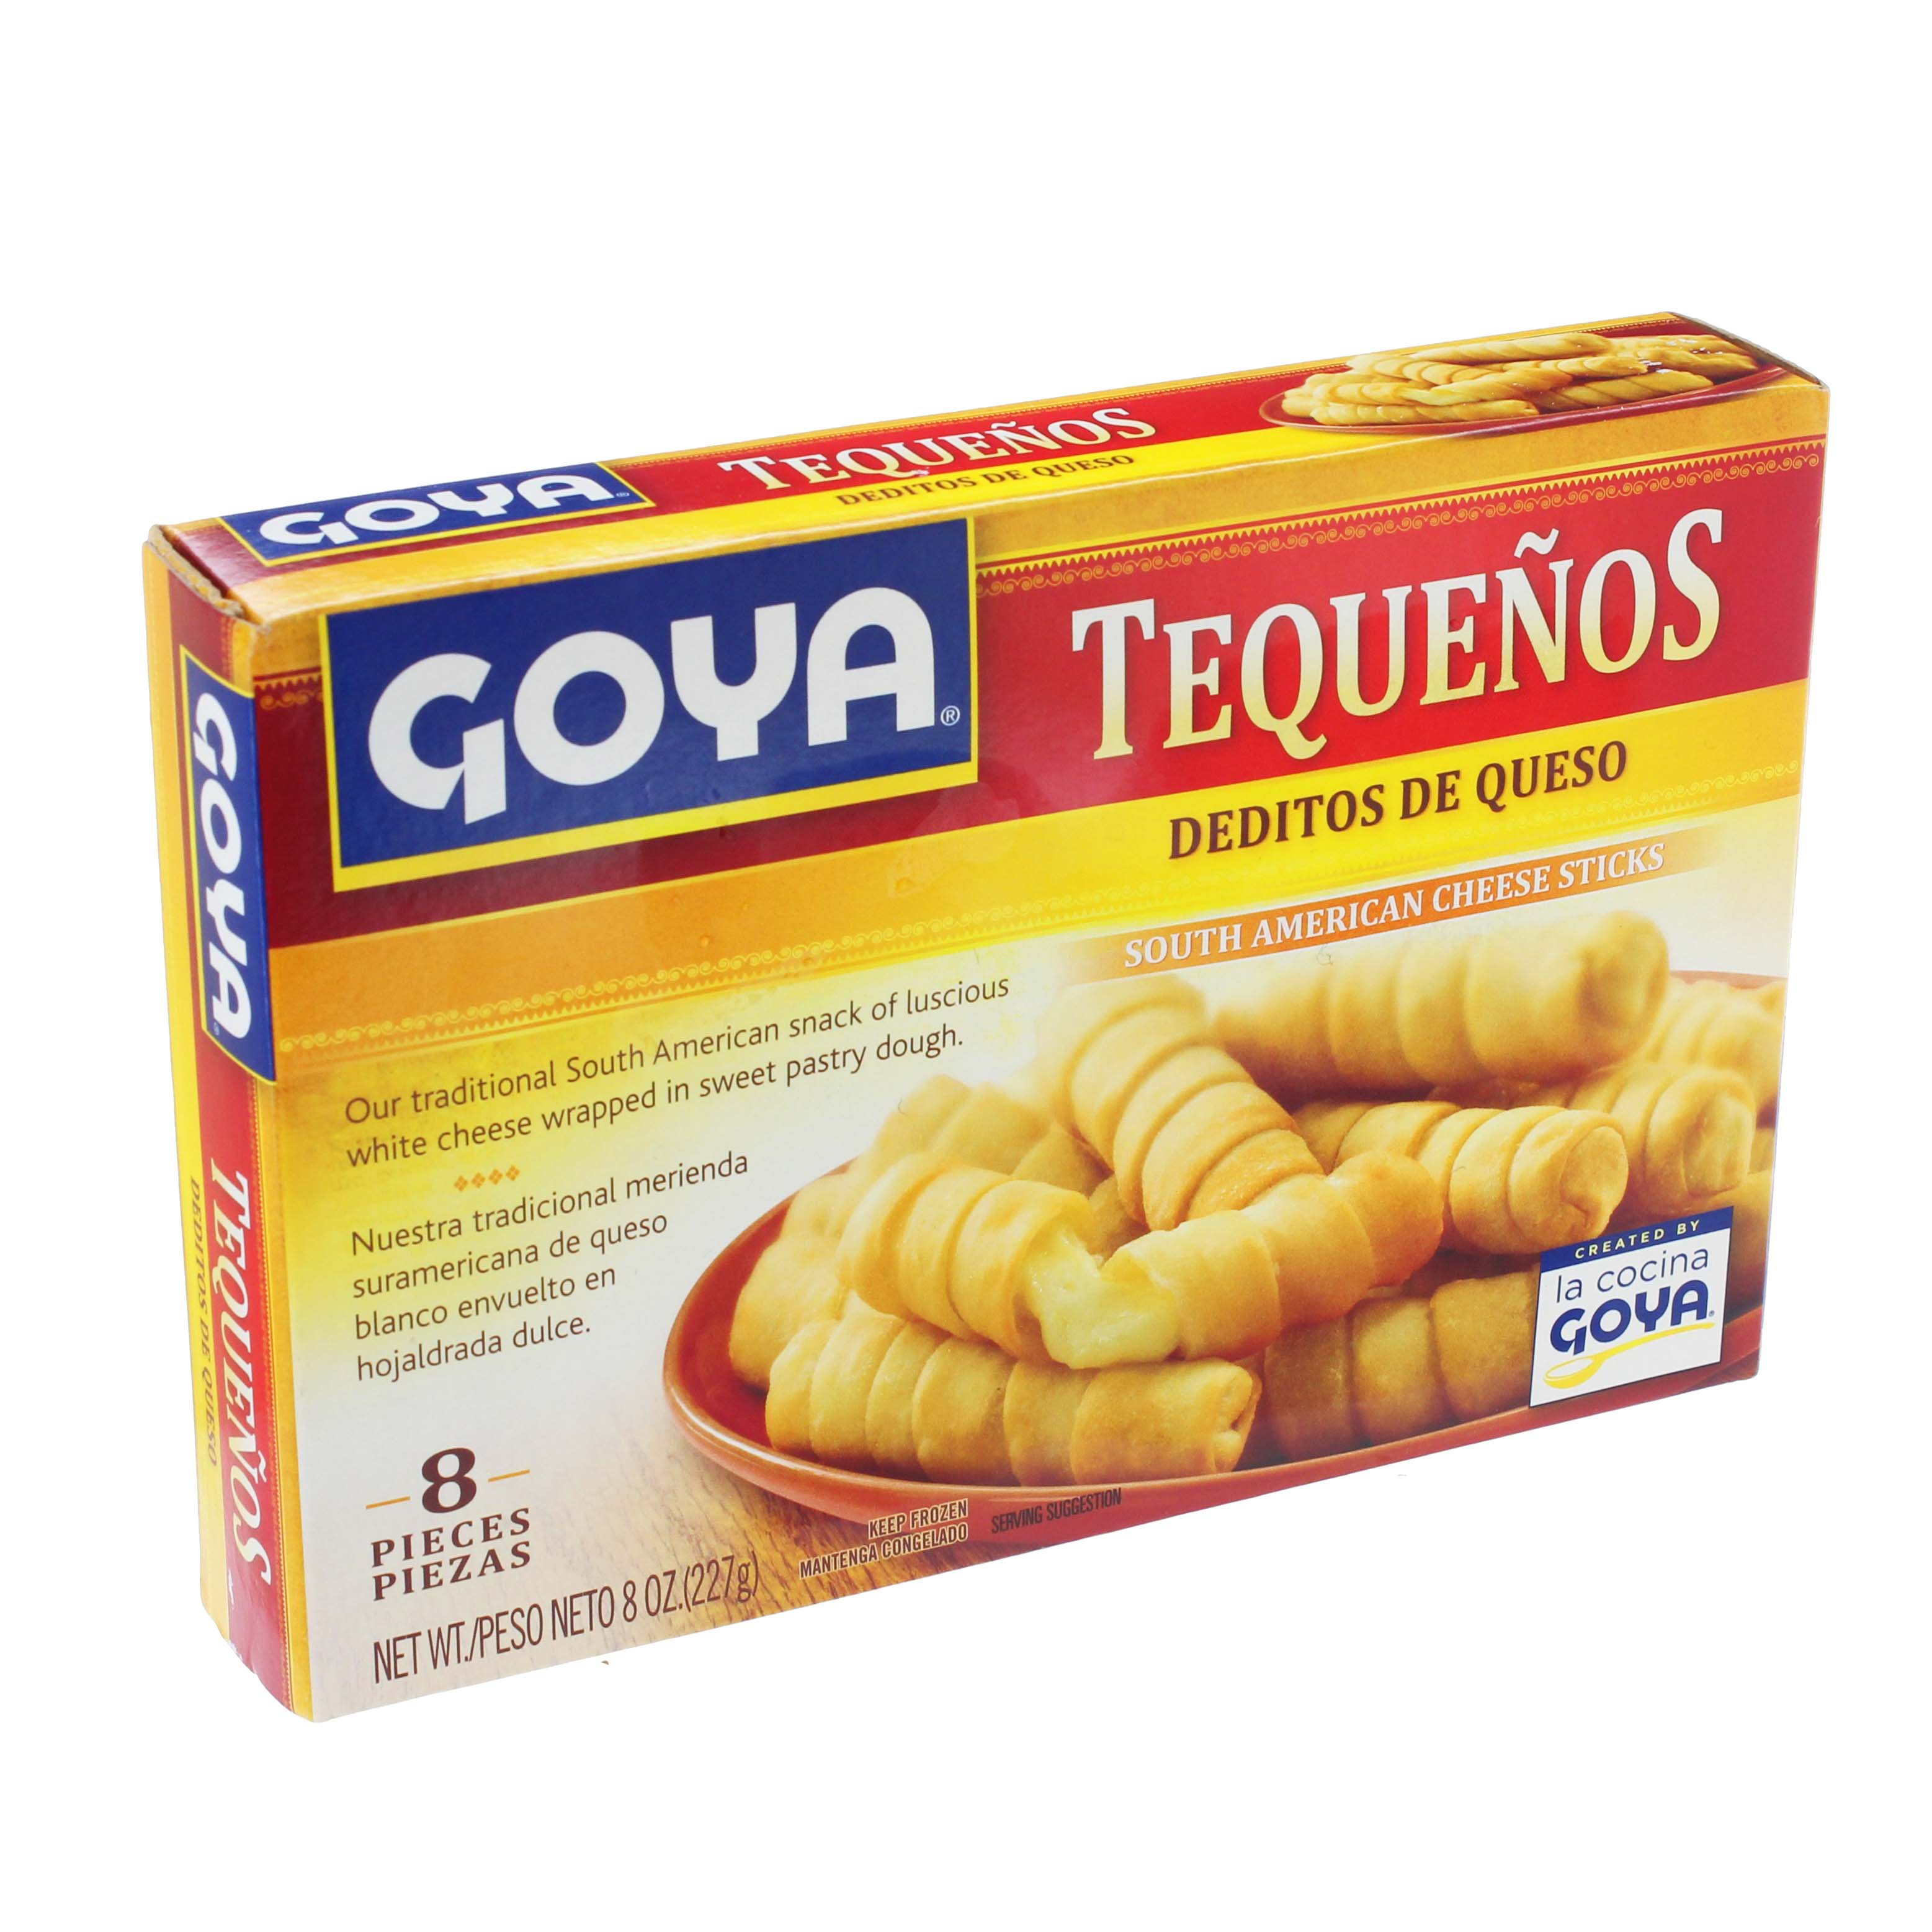 Tequenos South Cheese American Goya at Shop - H-E-B Sticks Appetizers